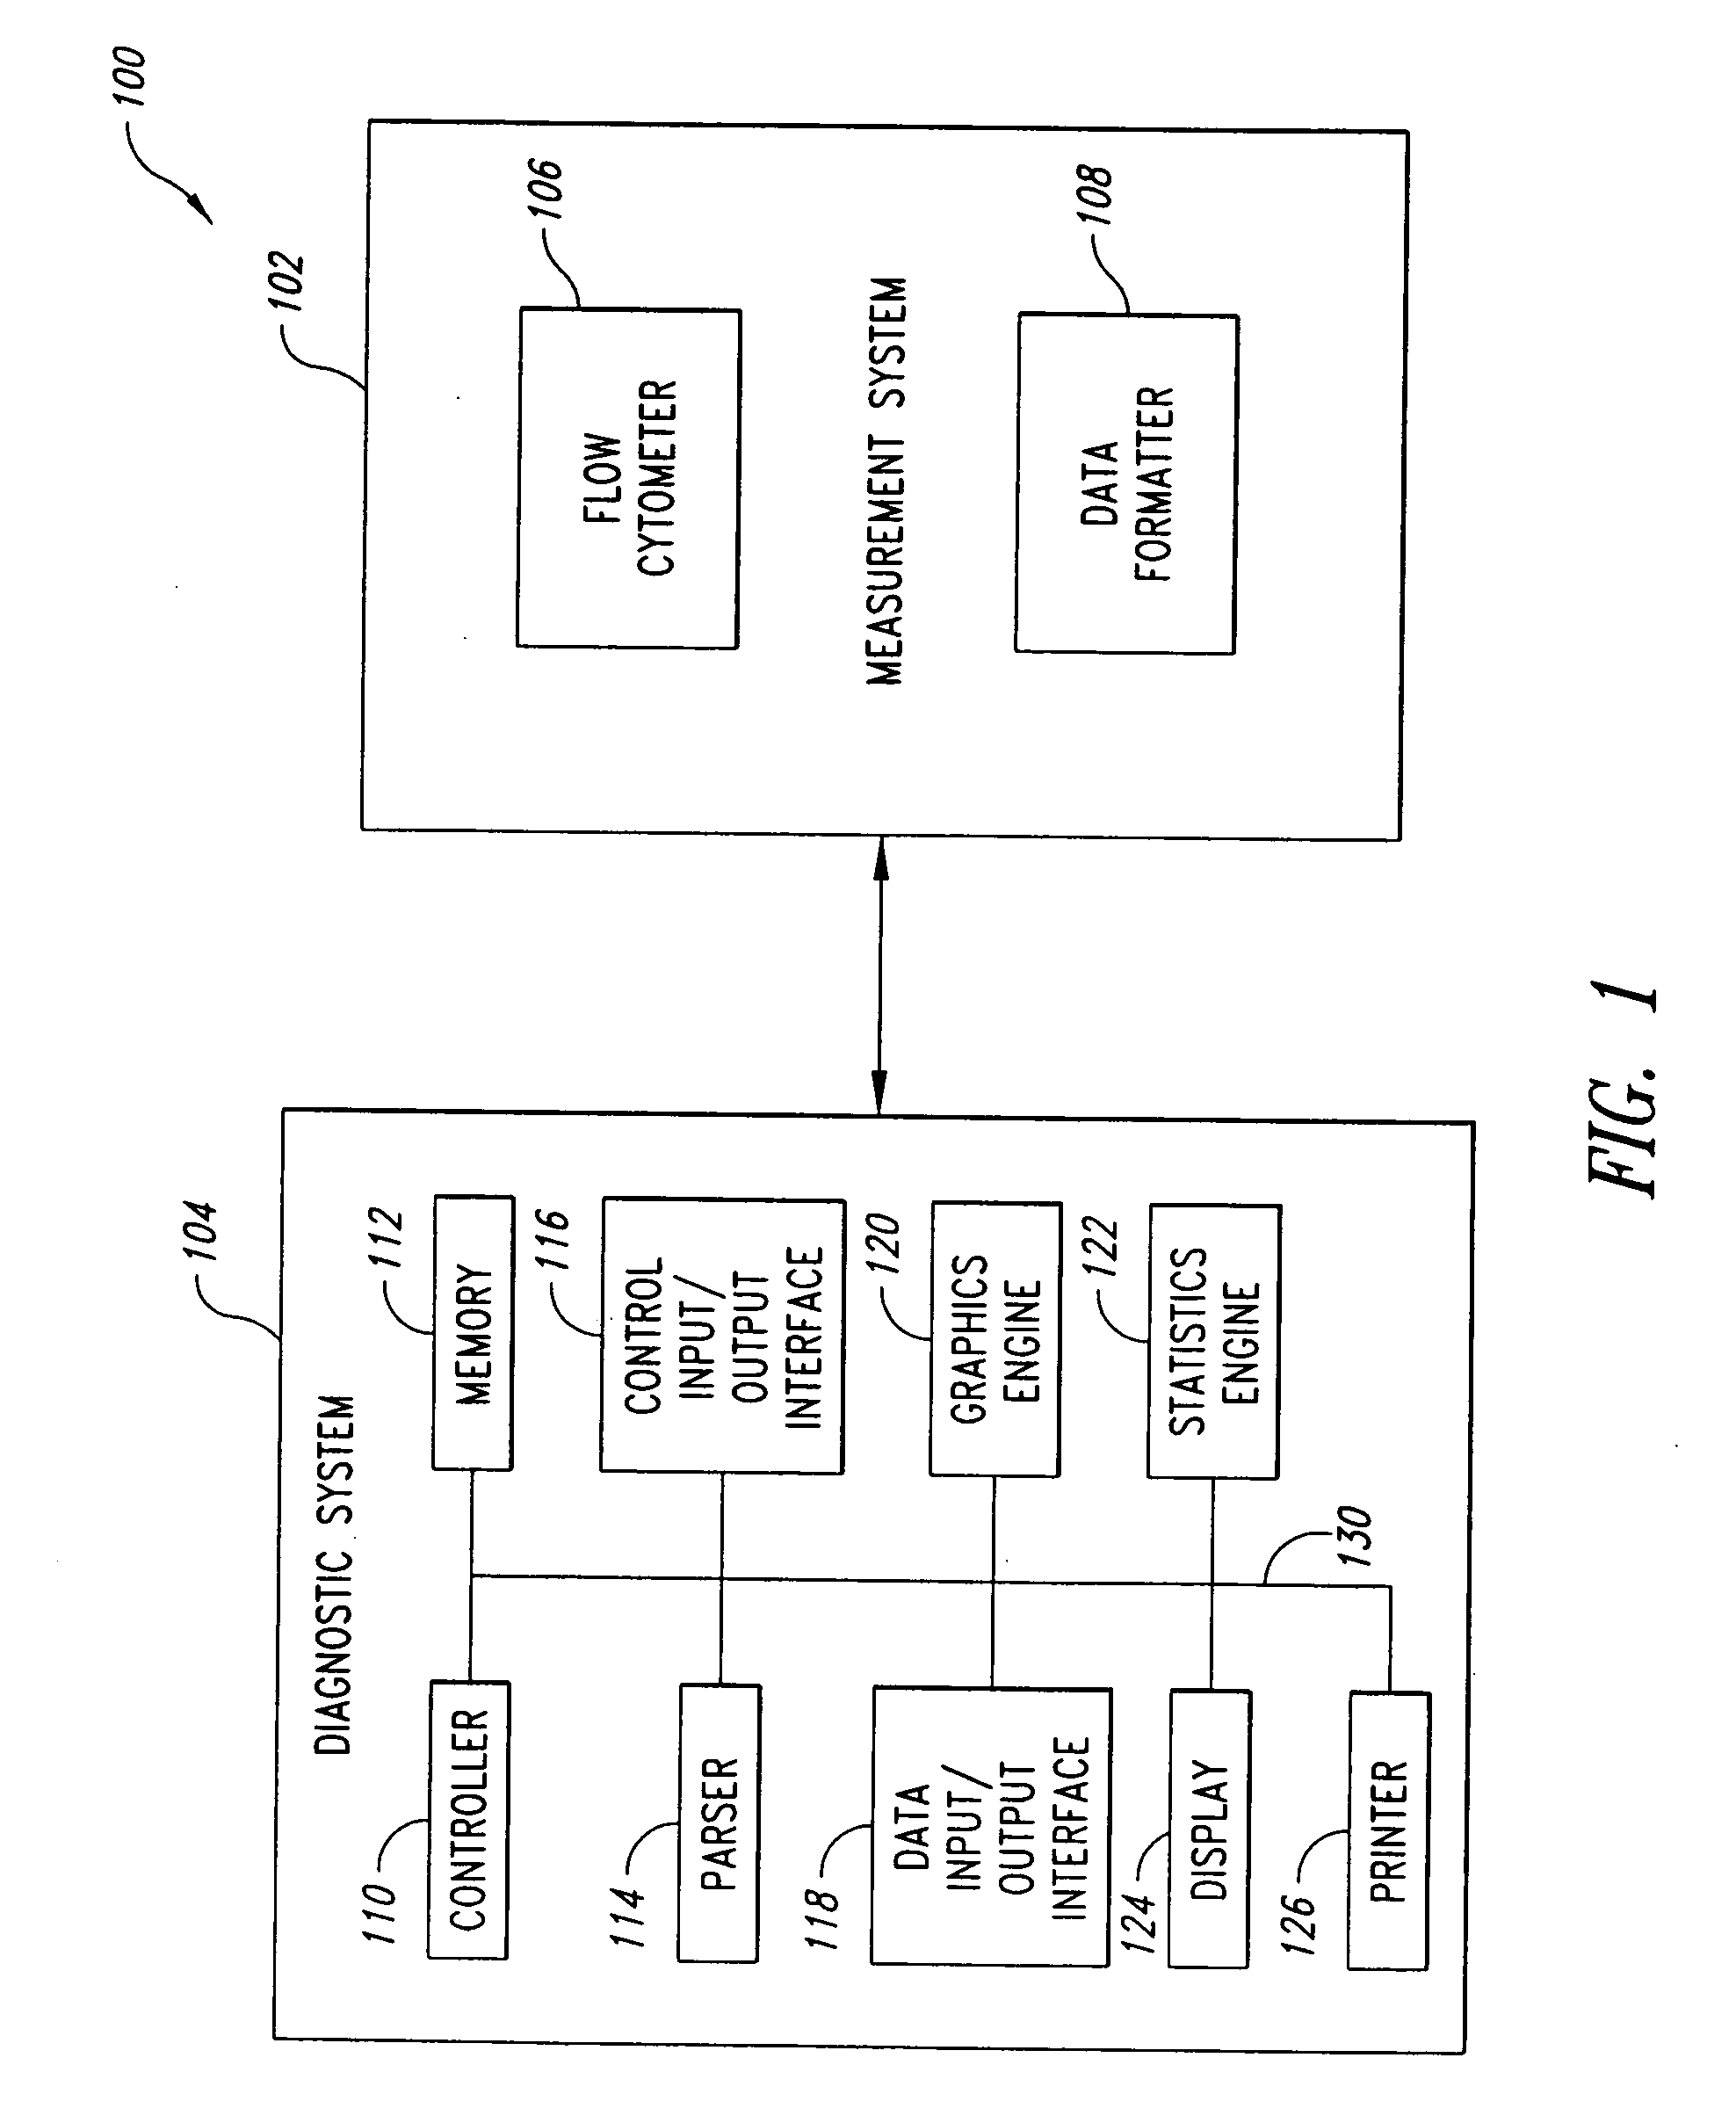 System, method, and article for detecting abnormal cells using multi-dimensional analysis